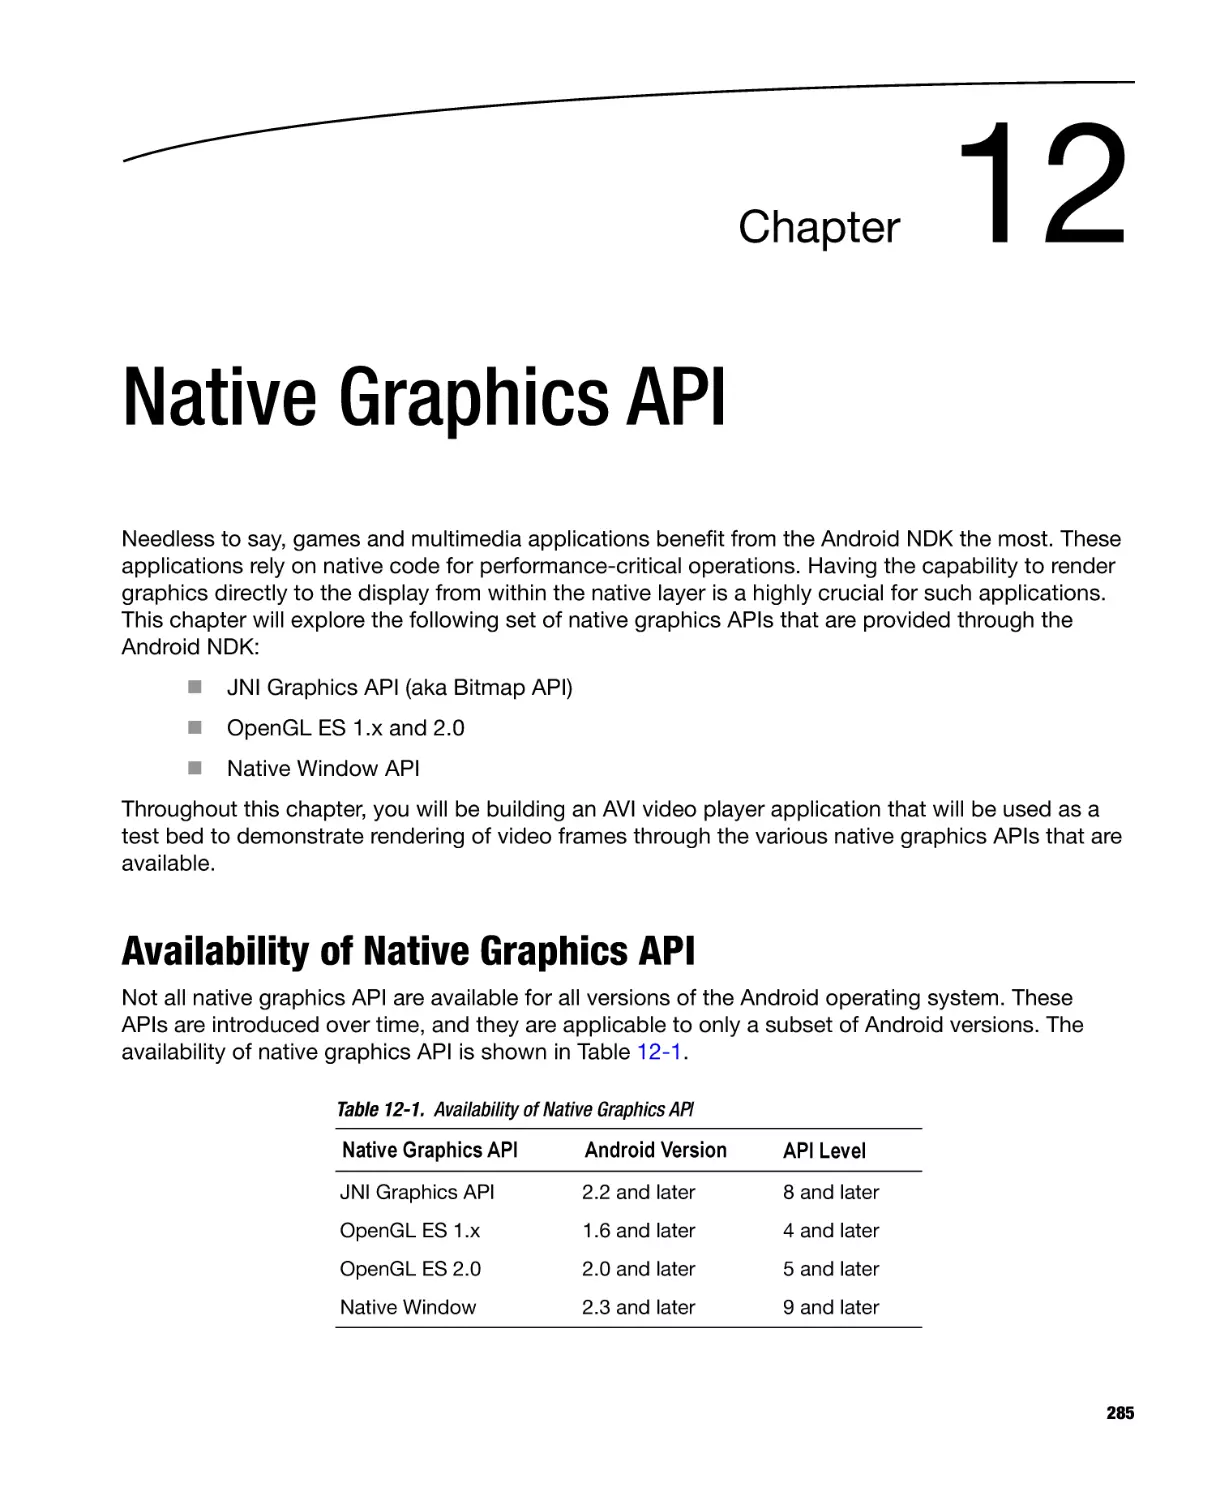 Chapter 12
Availability of Native Graphics API